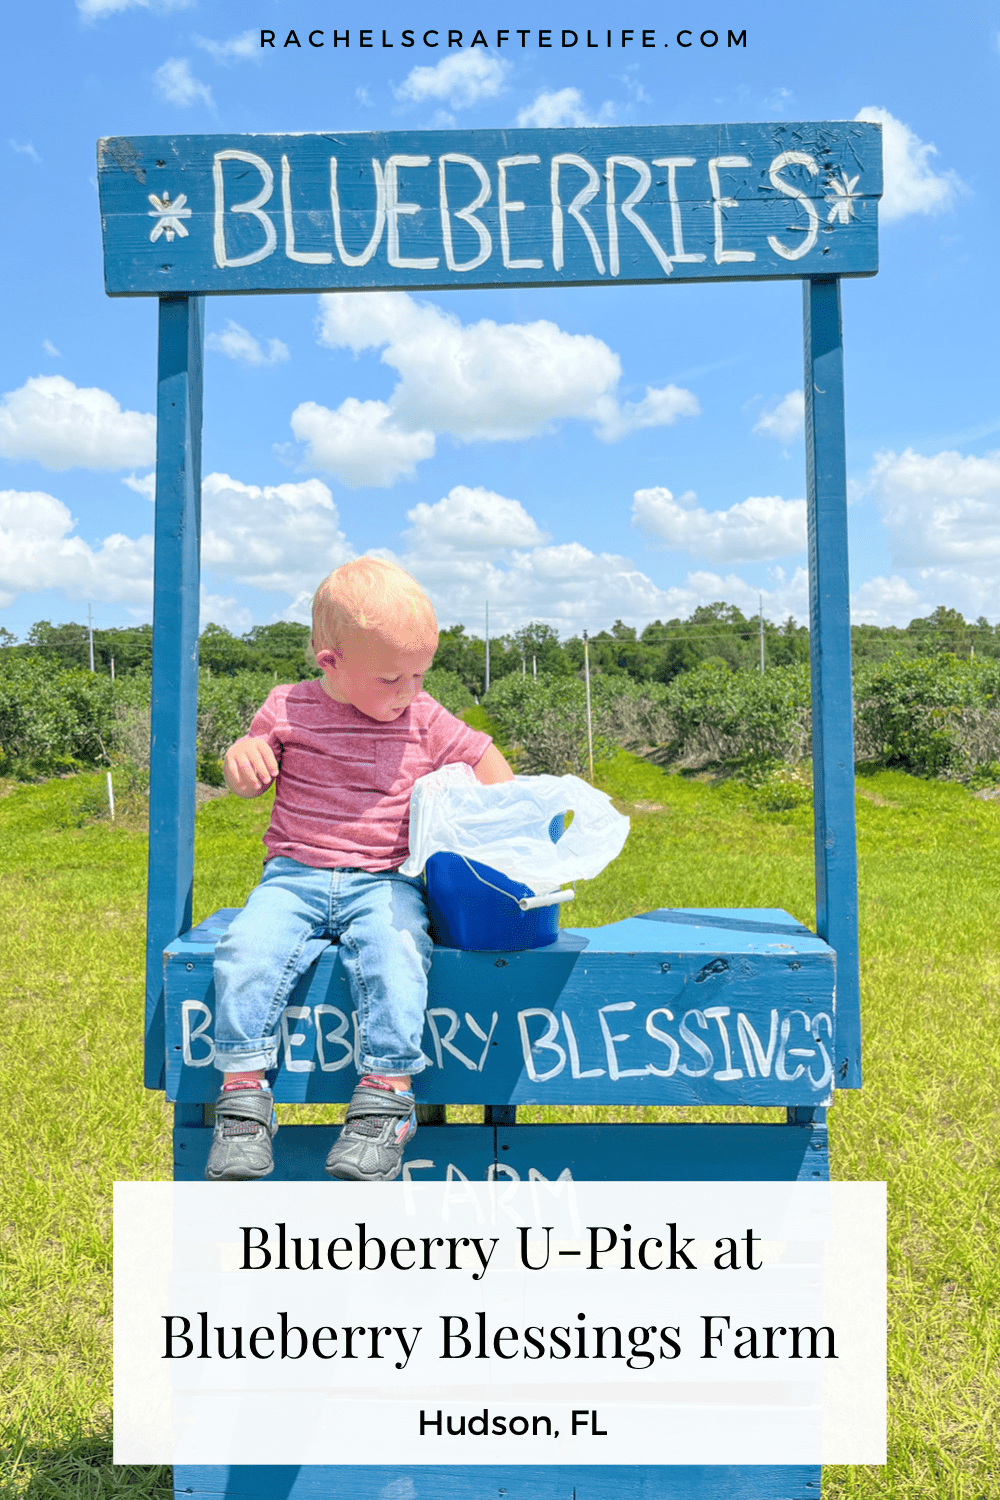 You are currently viewing Blueberry U-Pick at Blueberry Blessings Farm in Hudson, FL